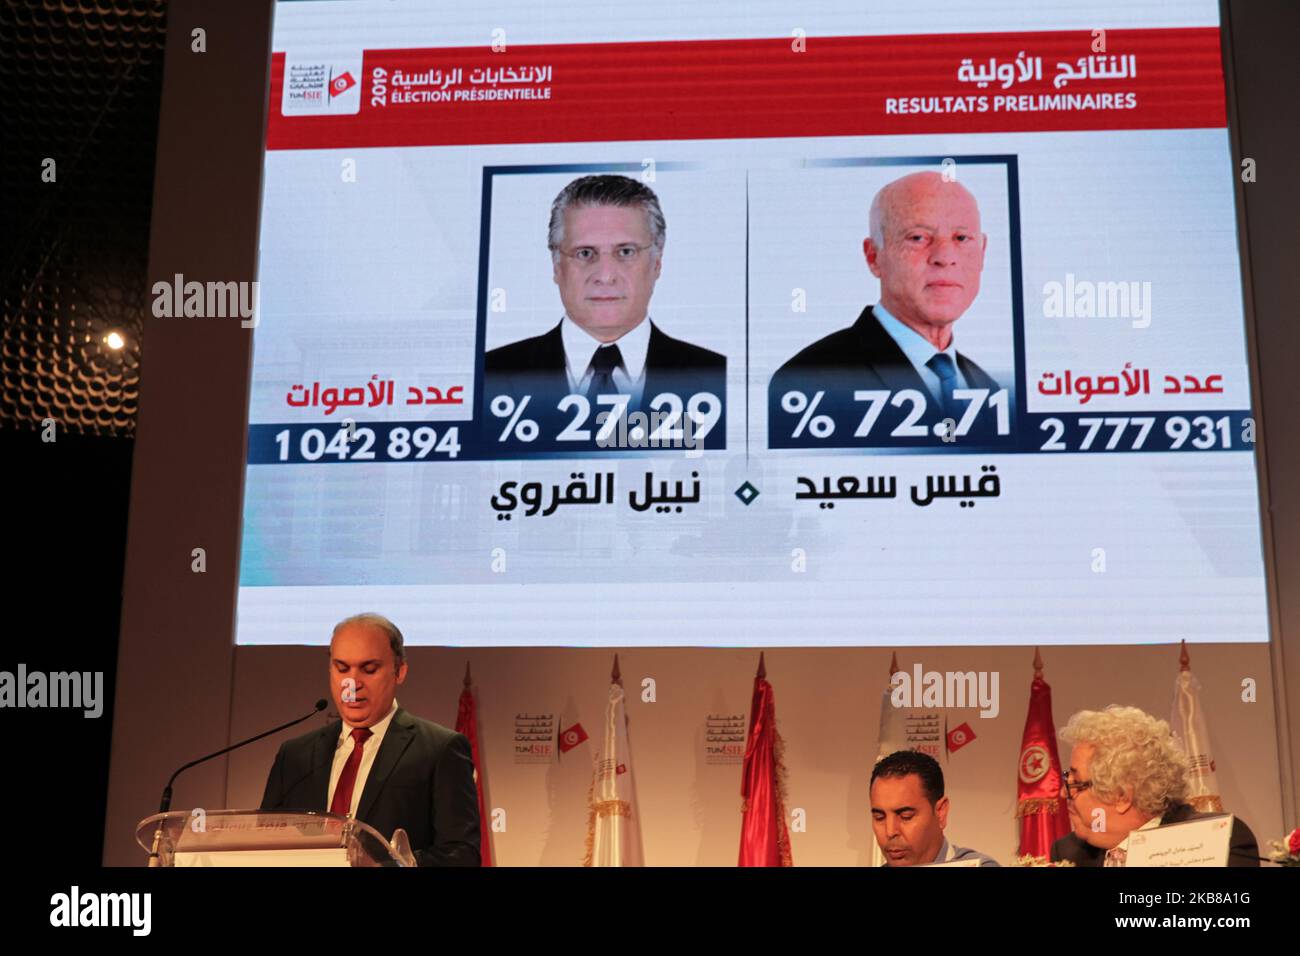 Portraits of presidential candidates Kais Saied and Nabil Karoui screened during a press conference held by the Independent High Authority for Elections (ISIE) in Tunis, Tunisia, on October 14, 2019, to announce the official preliminary results of the presidential election runoff in Tunis, Tunisia, on October 14, 2019. Kais Saied, is ranked first in official results with 72,71 %, Nabil Karoui is ranked second with 27,29 %. (Photo by Chedly Ben Ibrahim/NurPhoto) Stock Photo